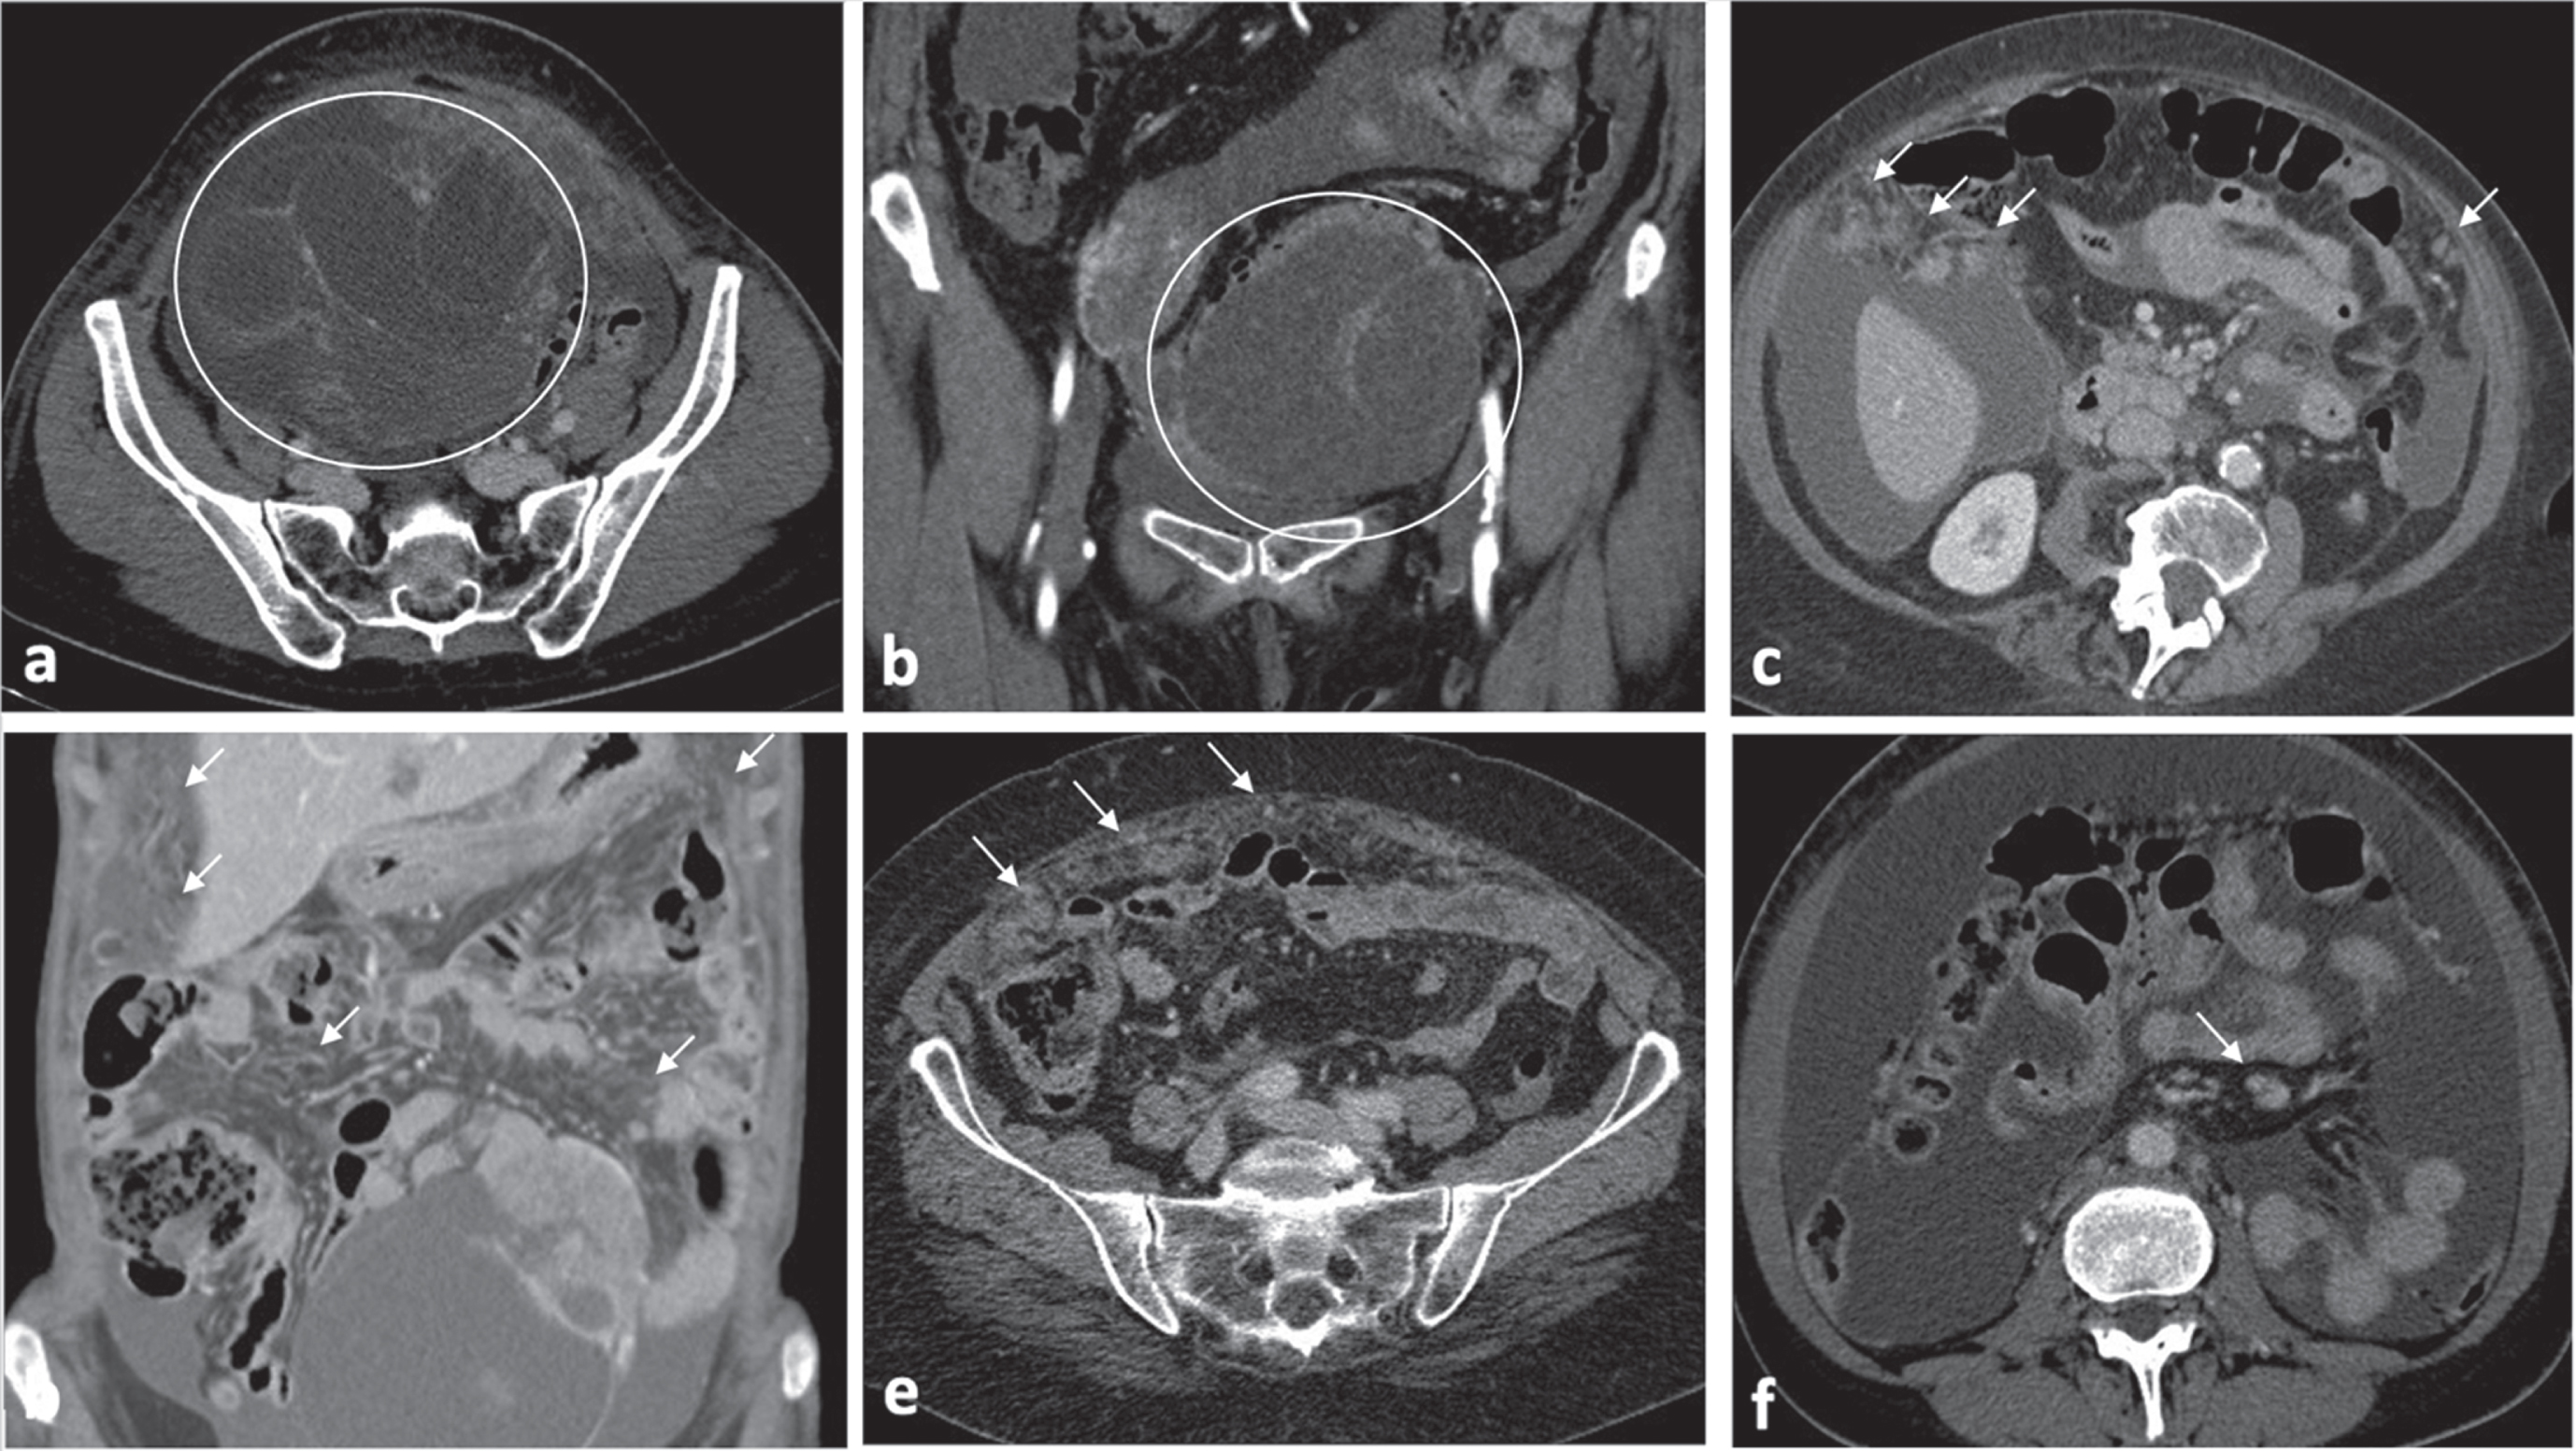 BRCA WT OC typical features consist in: ovarian masses with cystic/predominantly cystic structures (Fig. 3a-b); micronodular carcinomatosis and macronodular carcinomatosis with infiltrative morphologic pattern characterized by mostly poorly defined borders (Fig. 3c-e); presence of mesenteric lymphadenopathy (short-axis greater than 1 cm) (Fig. 3f).